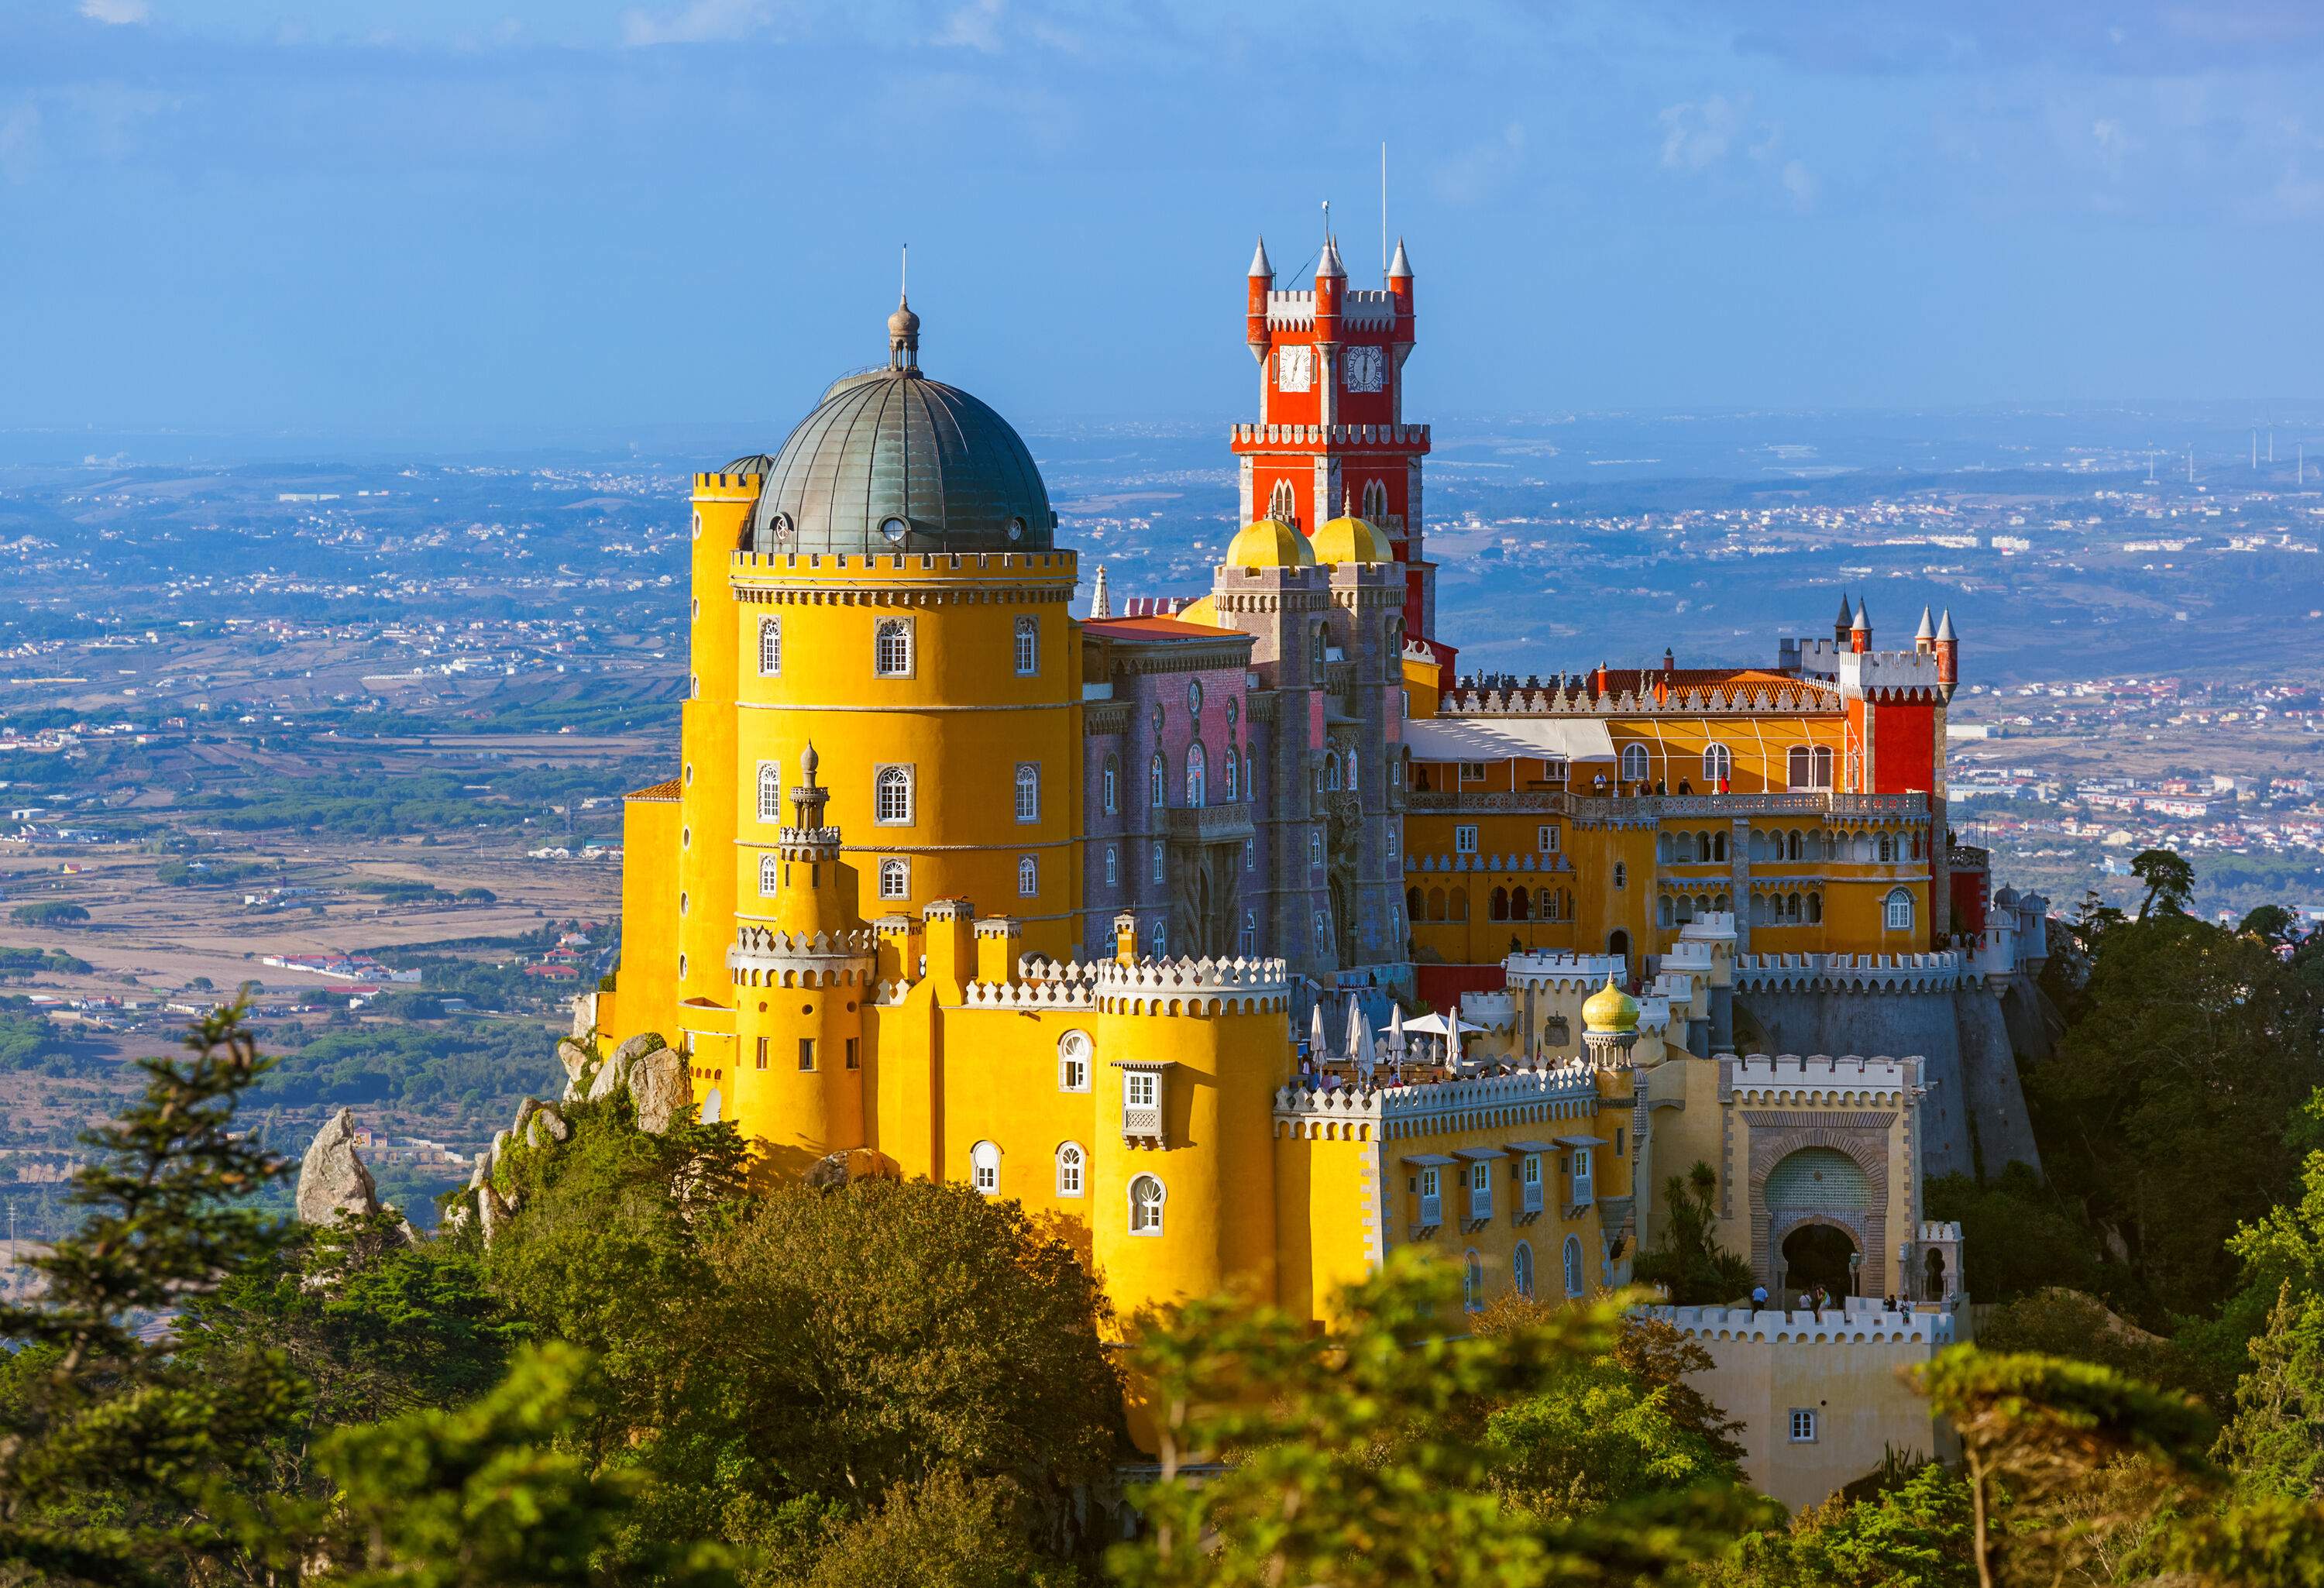 A vibrant, colourful Romanticist castle perched on a hilltop overlooking a vast land sprinkled with houses.